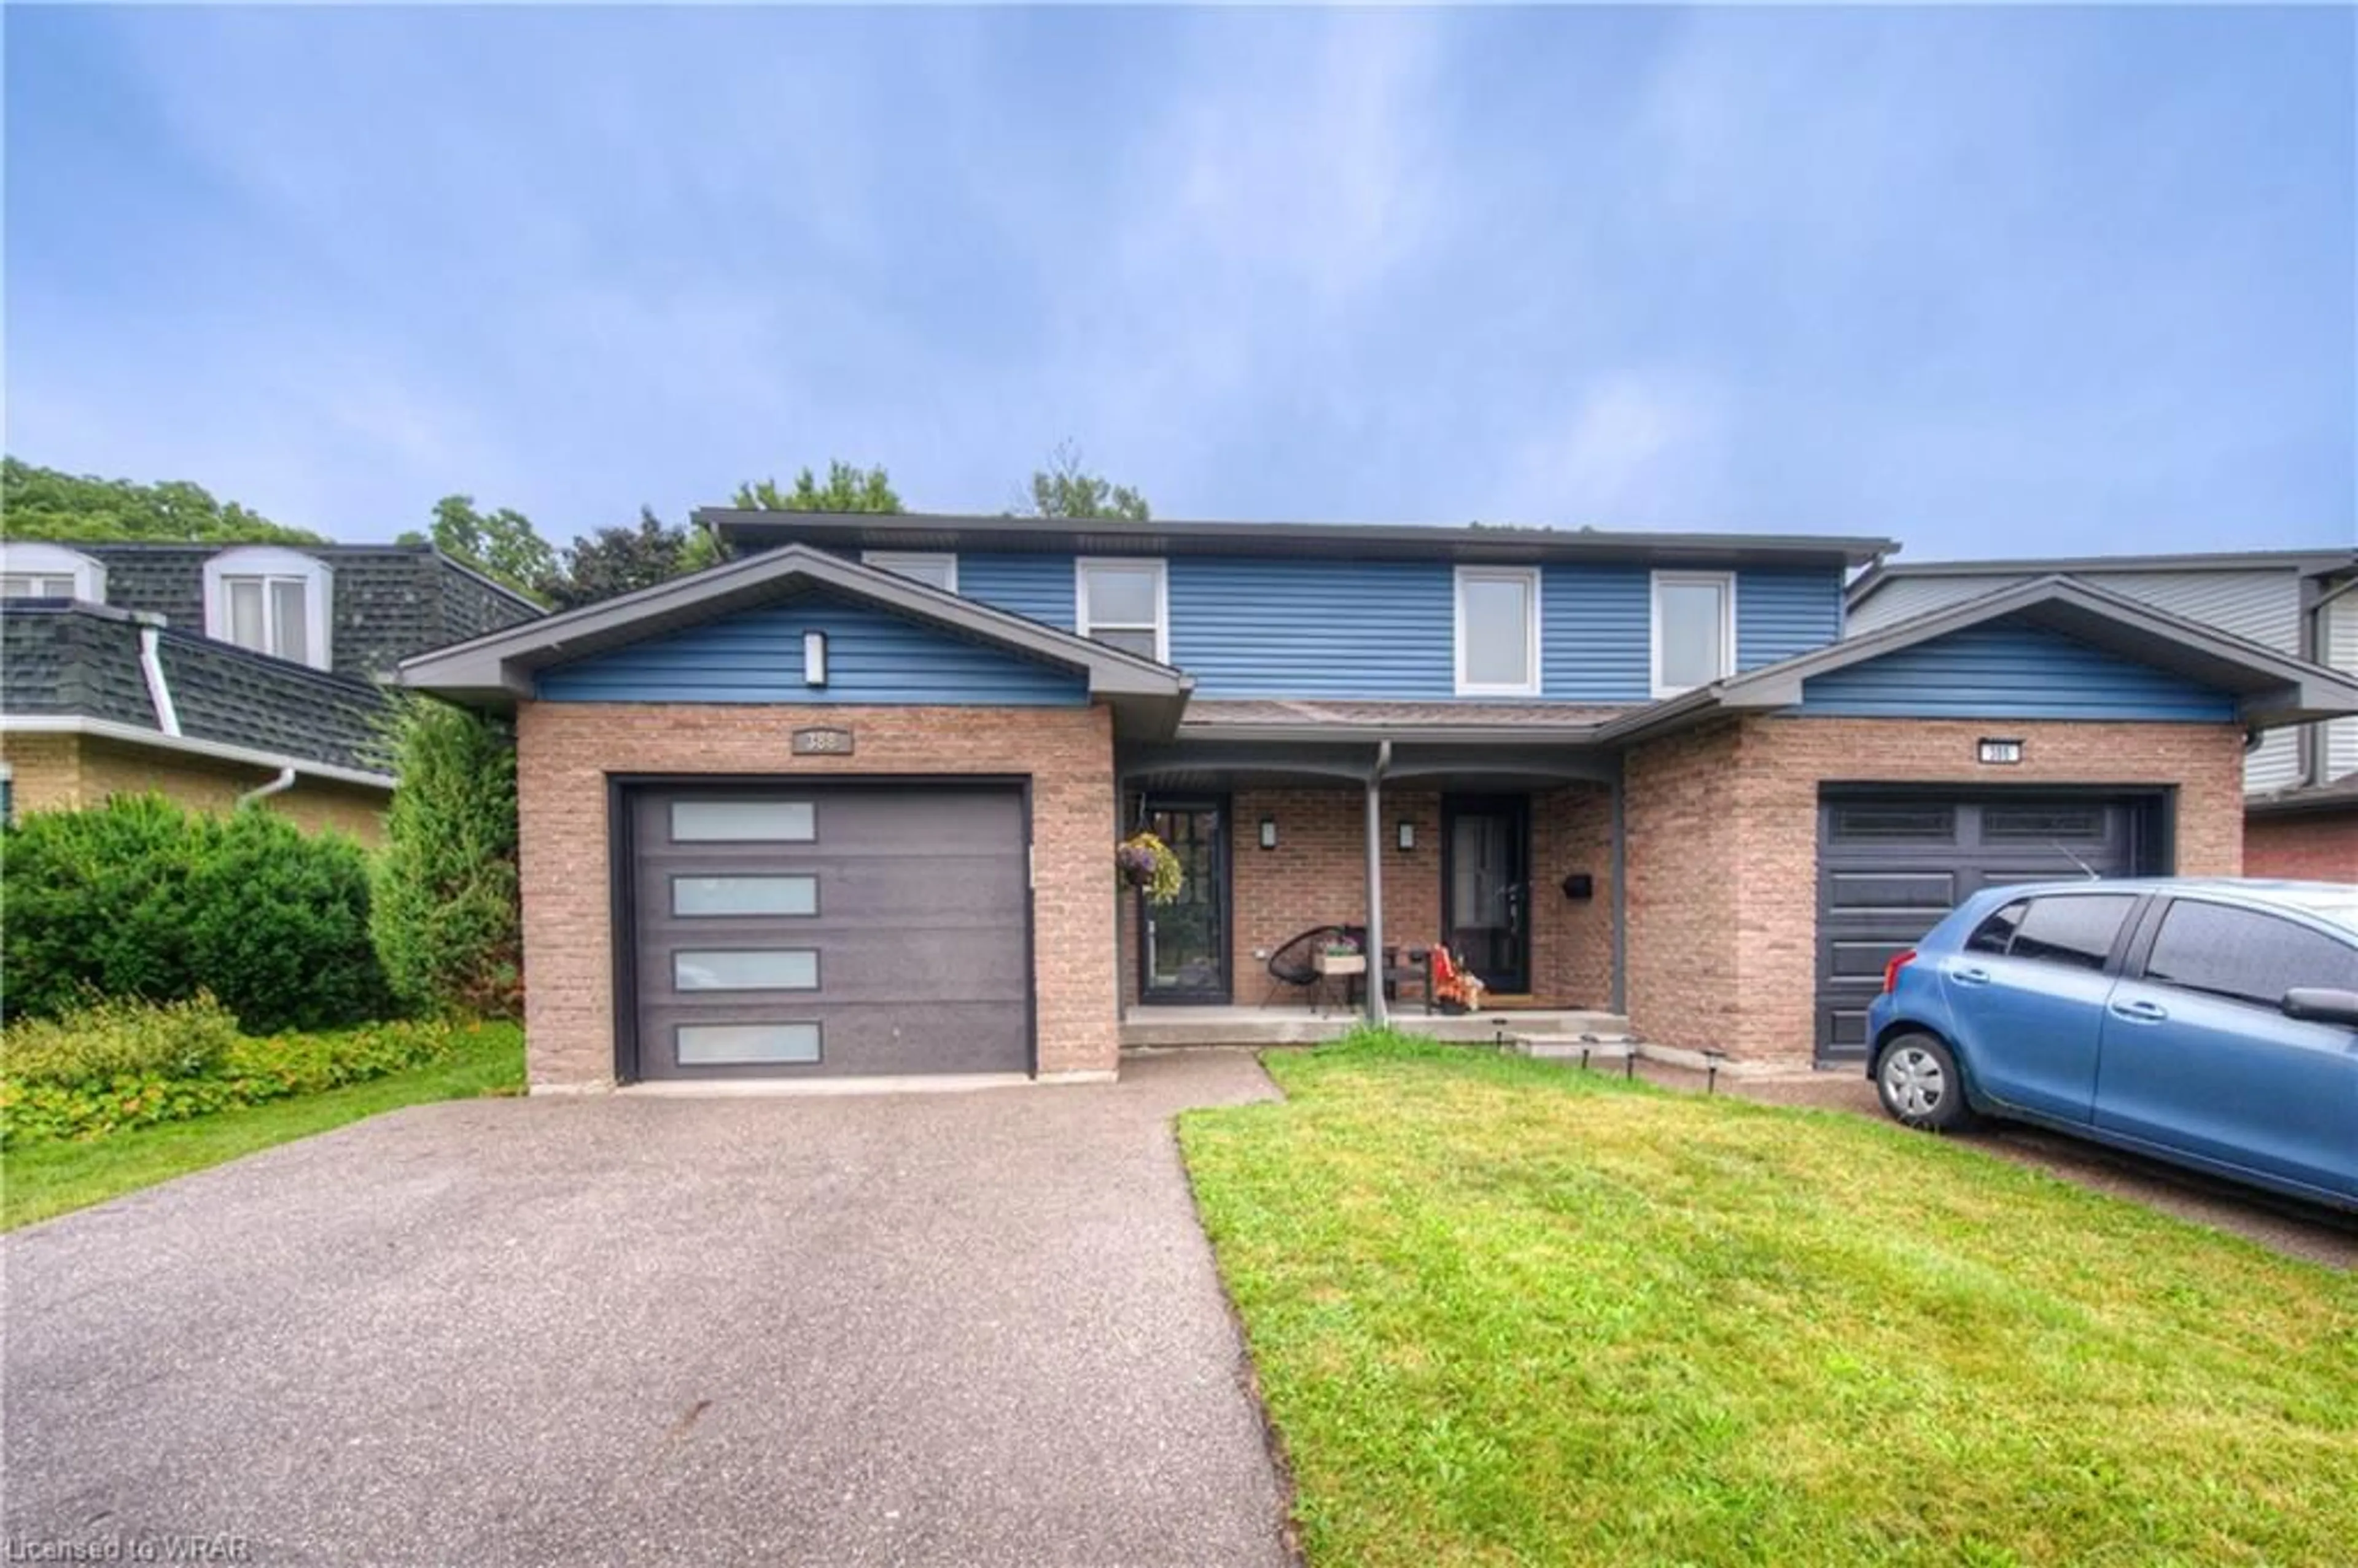 Home with brick exterior material for 388 Pioneer Dr, Kitchener Ontario N2P 1K6